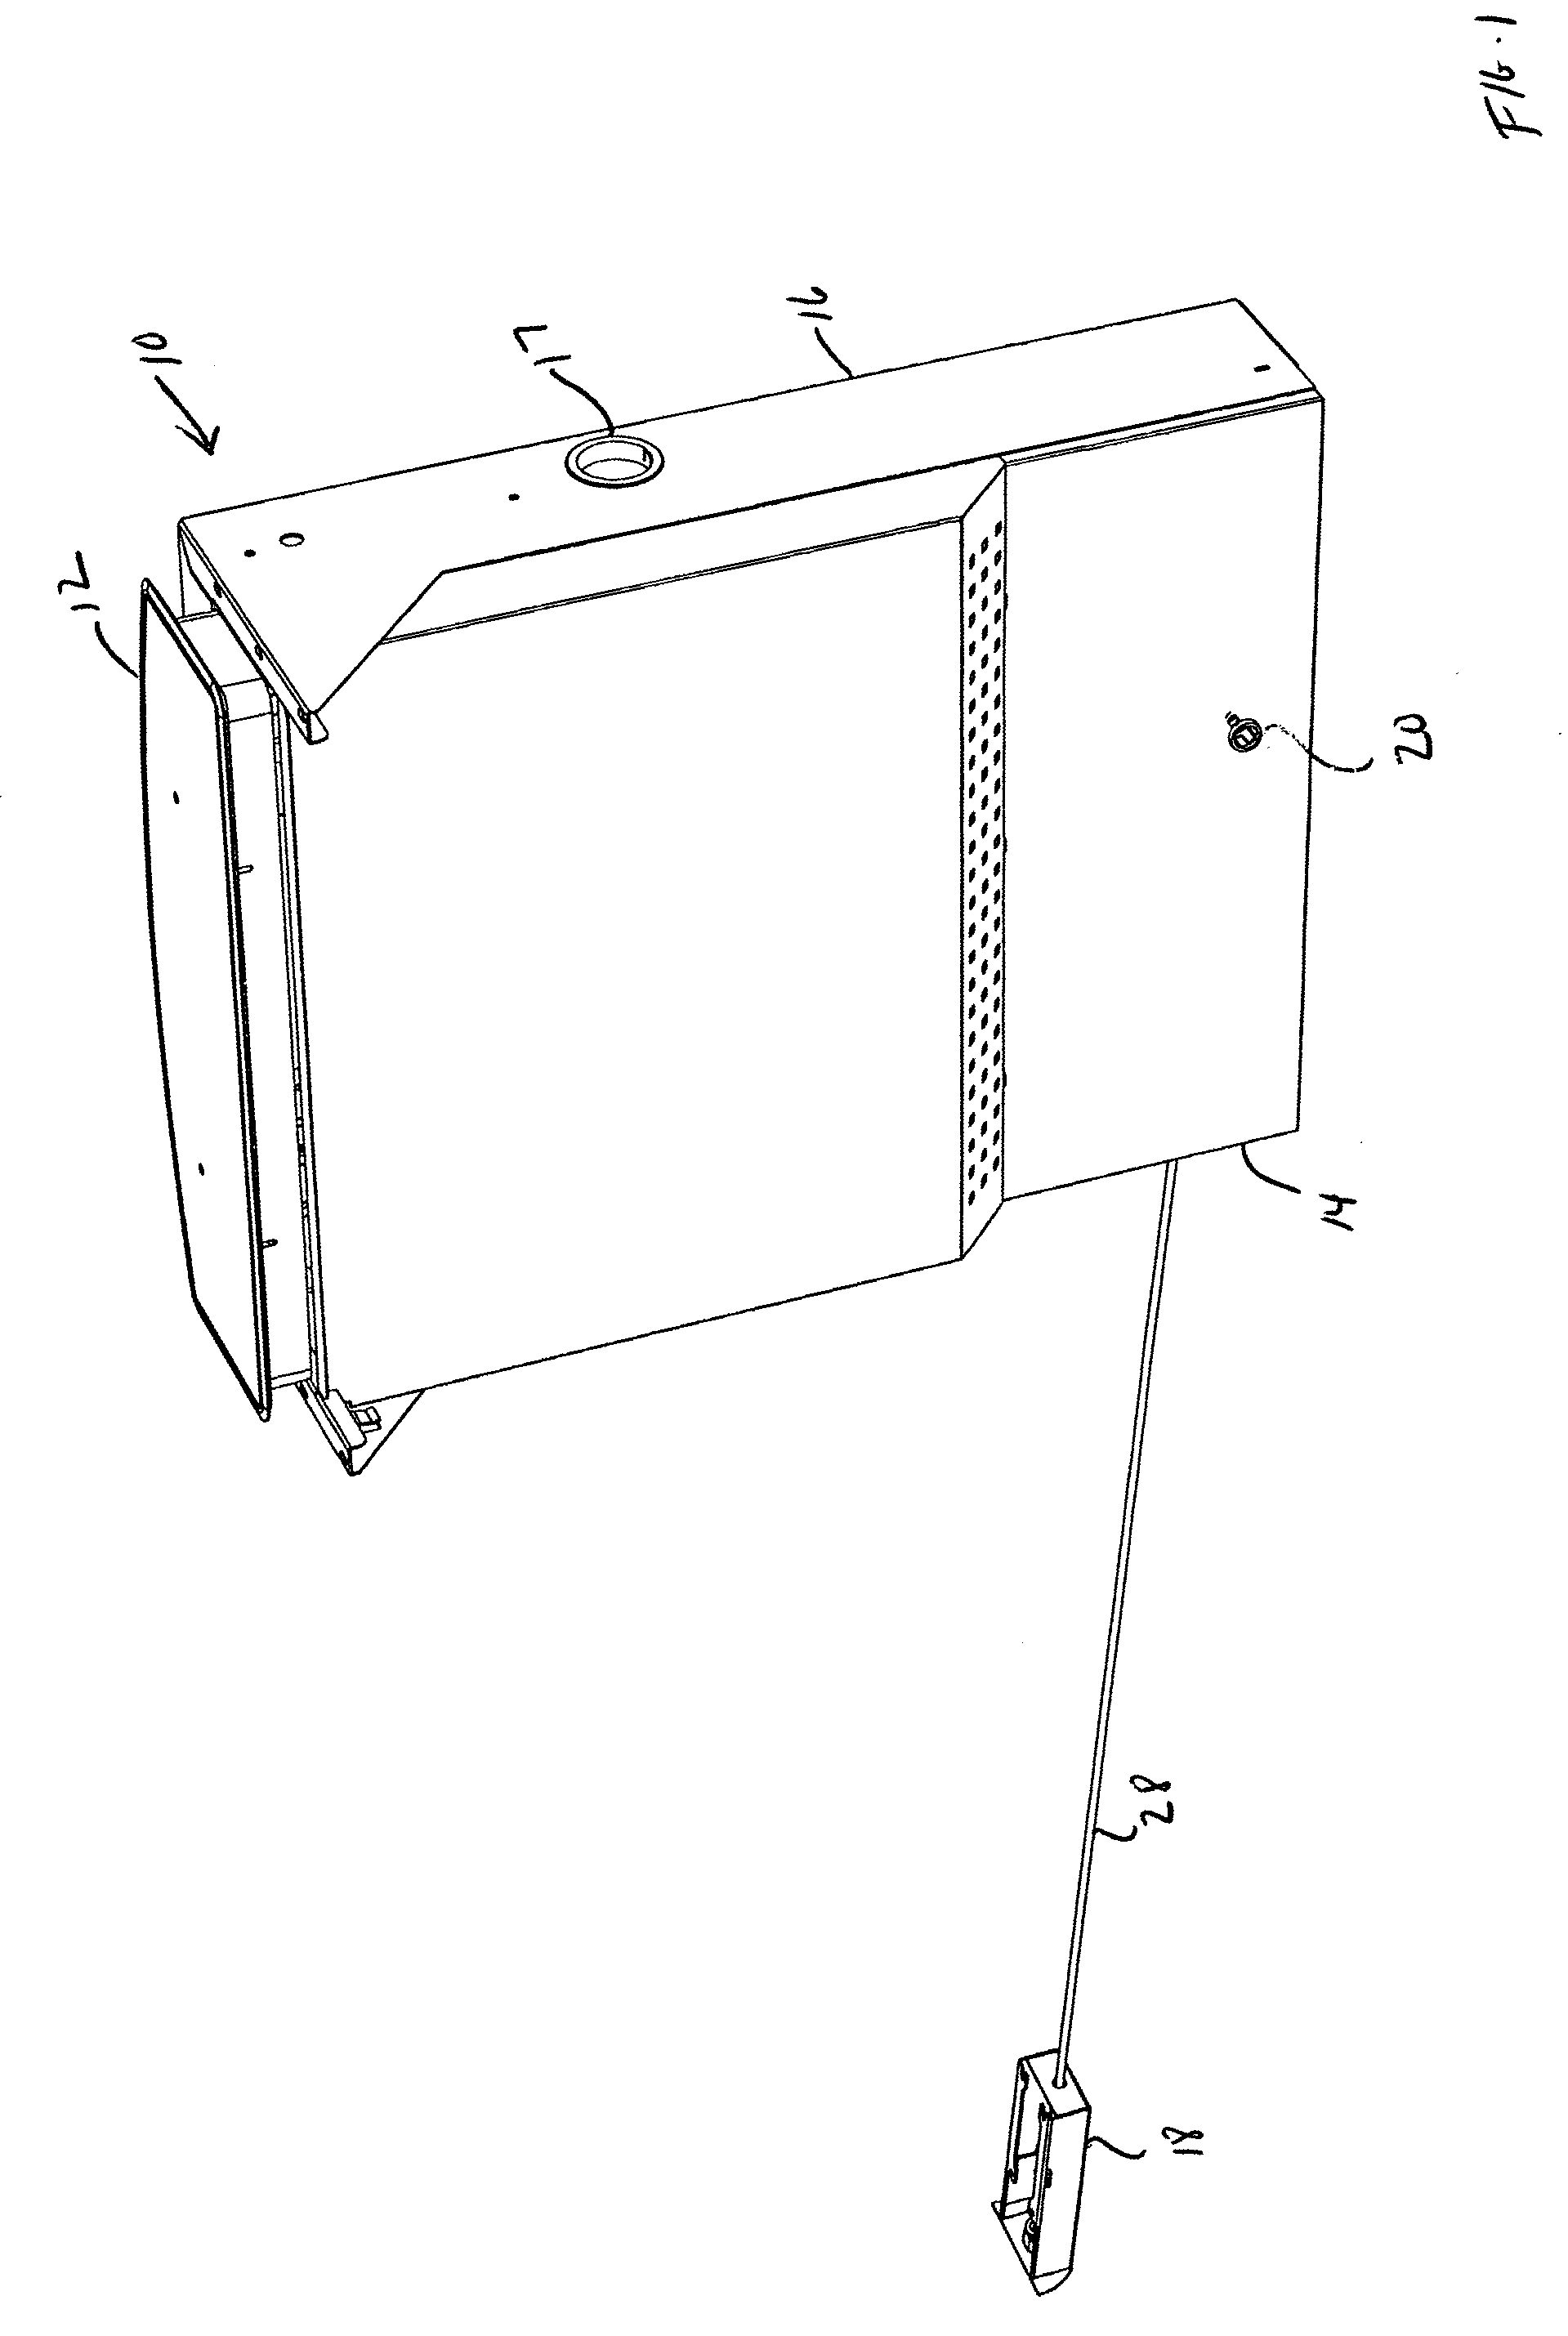 Computer monitor lift and storage mechanism